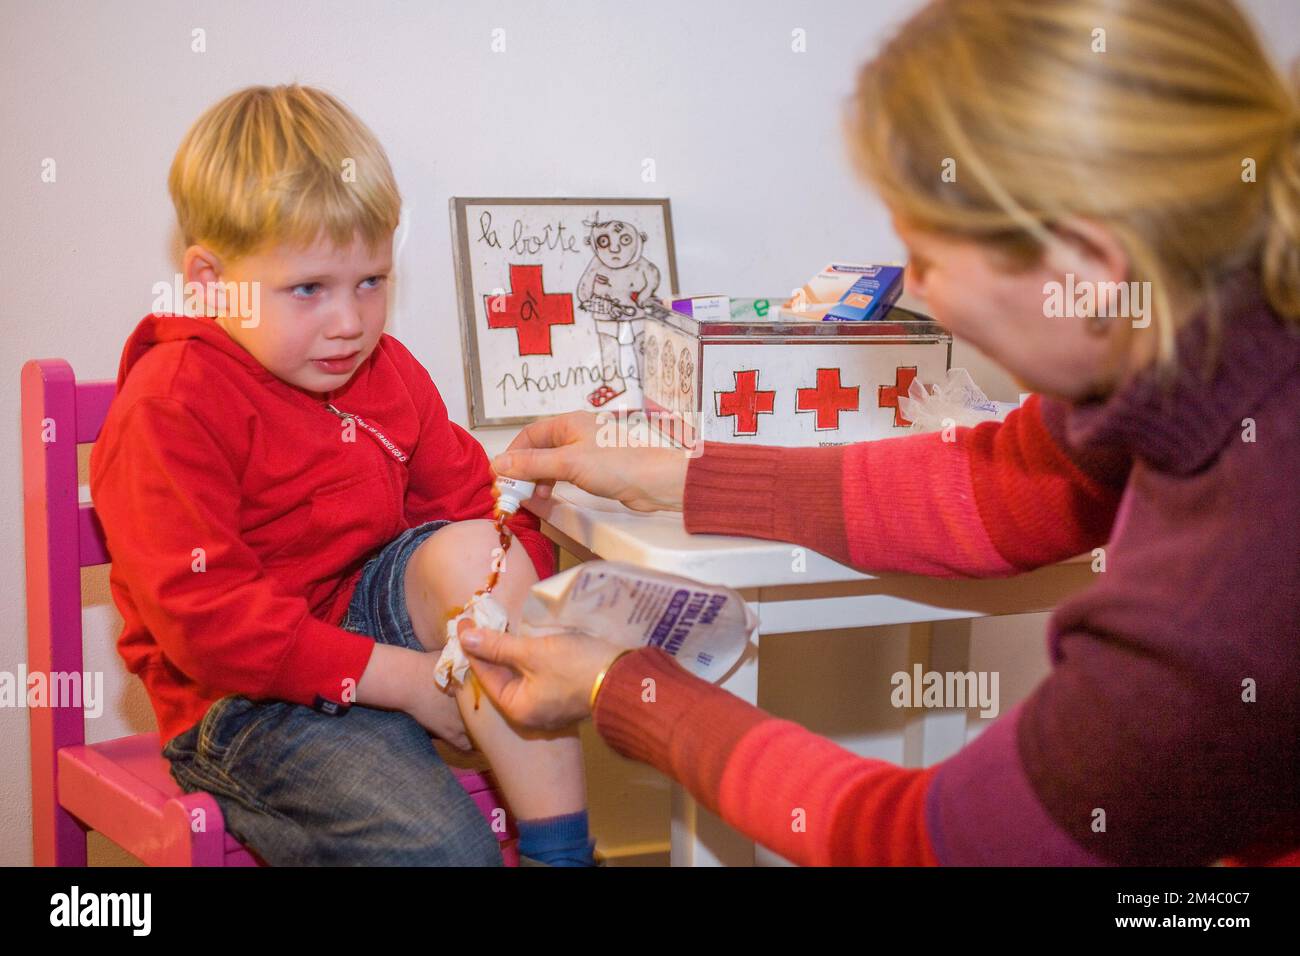 Netherlands, Arnhem; Mother puts iodine on the injured knee of her crying son. Stock Photo